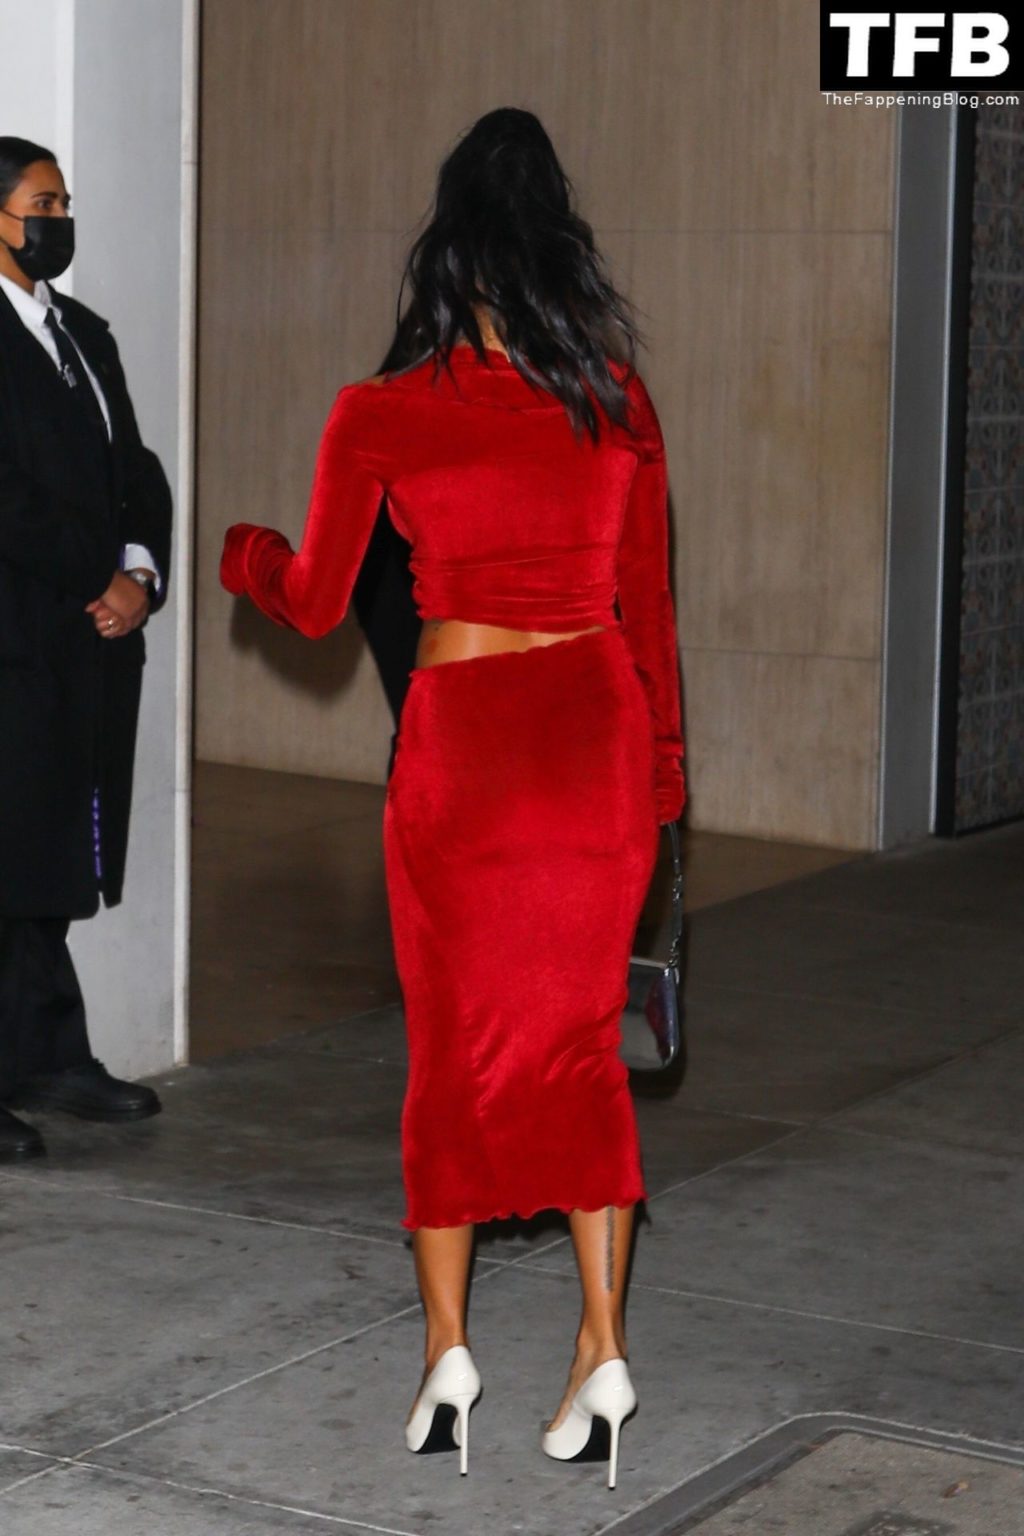 Karrueche Tran Sexy The Fappening Blog 46 1024x1536 - Karrueche Tran Shows Her Pokies in a Red Dress at The Hollywood Reporter’s Oscar Nominees Night (68 Photos)